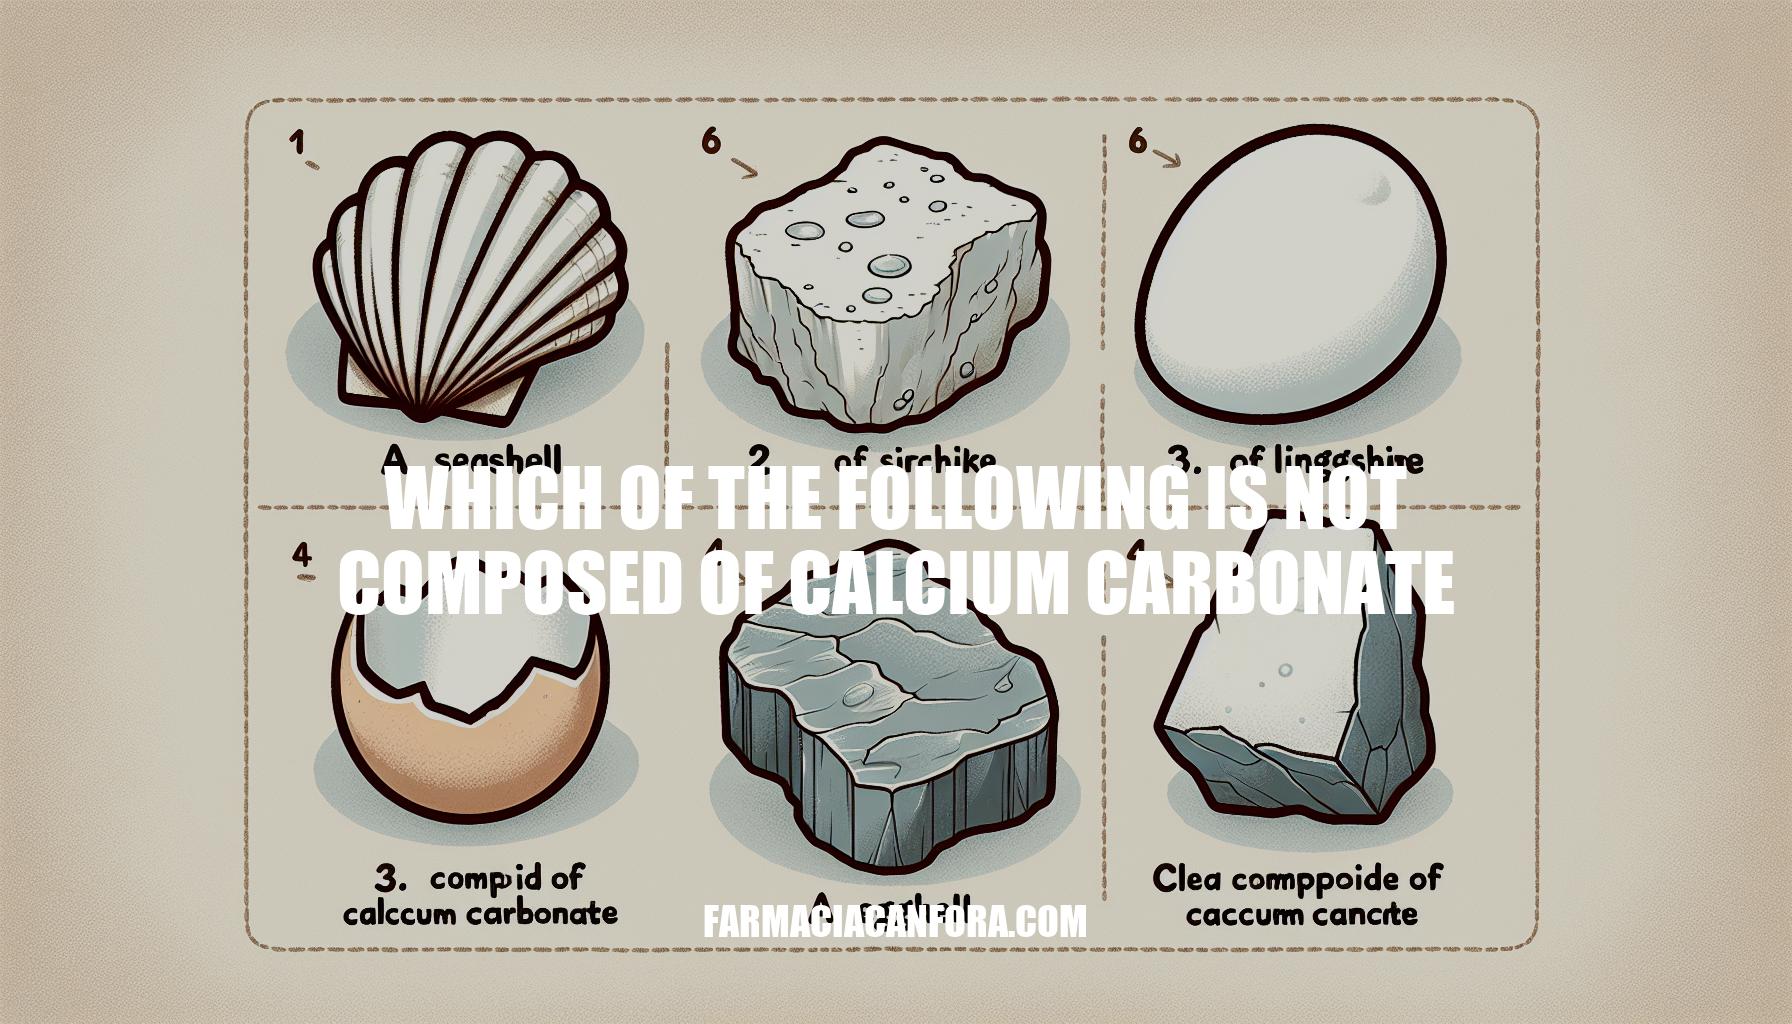 Identifying Substances: Which of the Following Is Not Composed of Calcium Carbonate